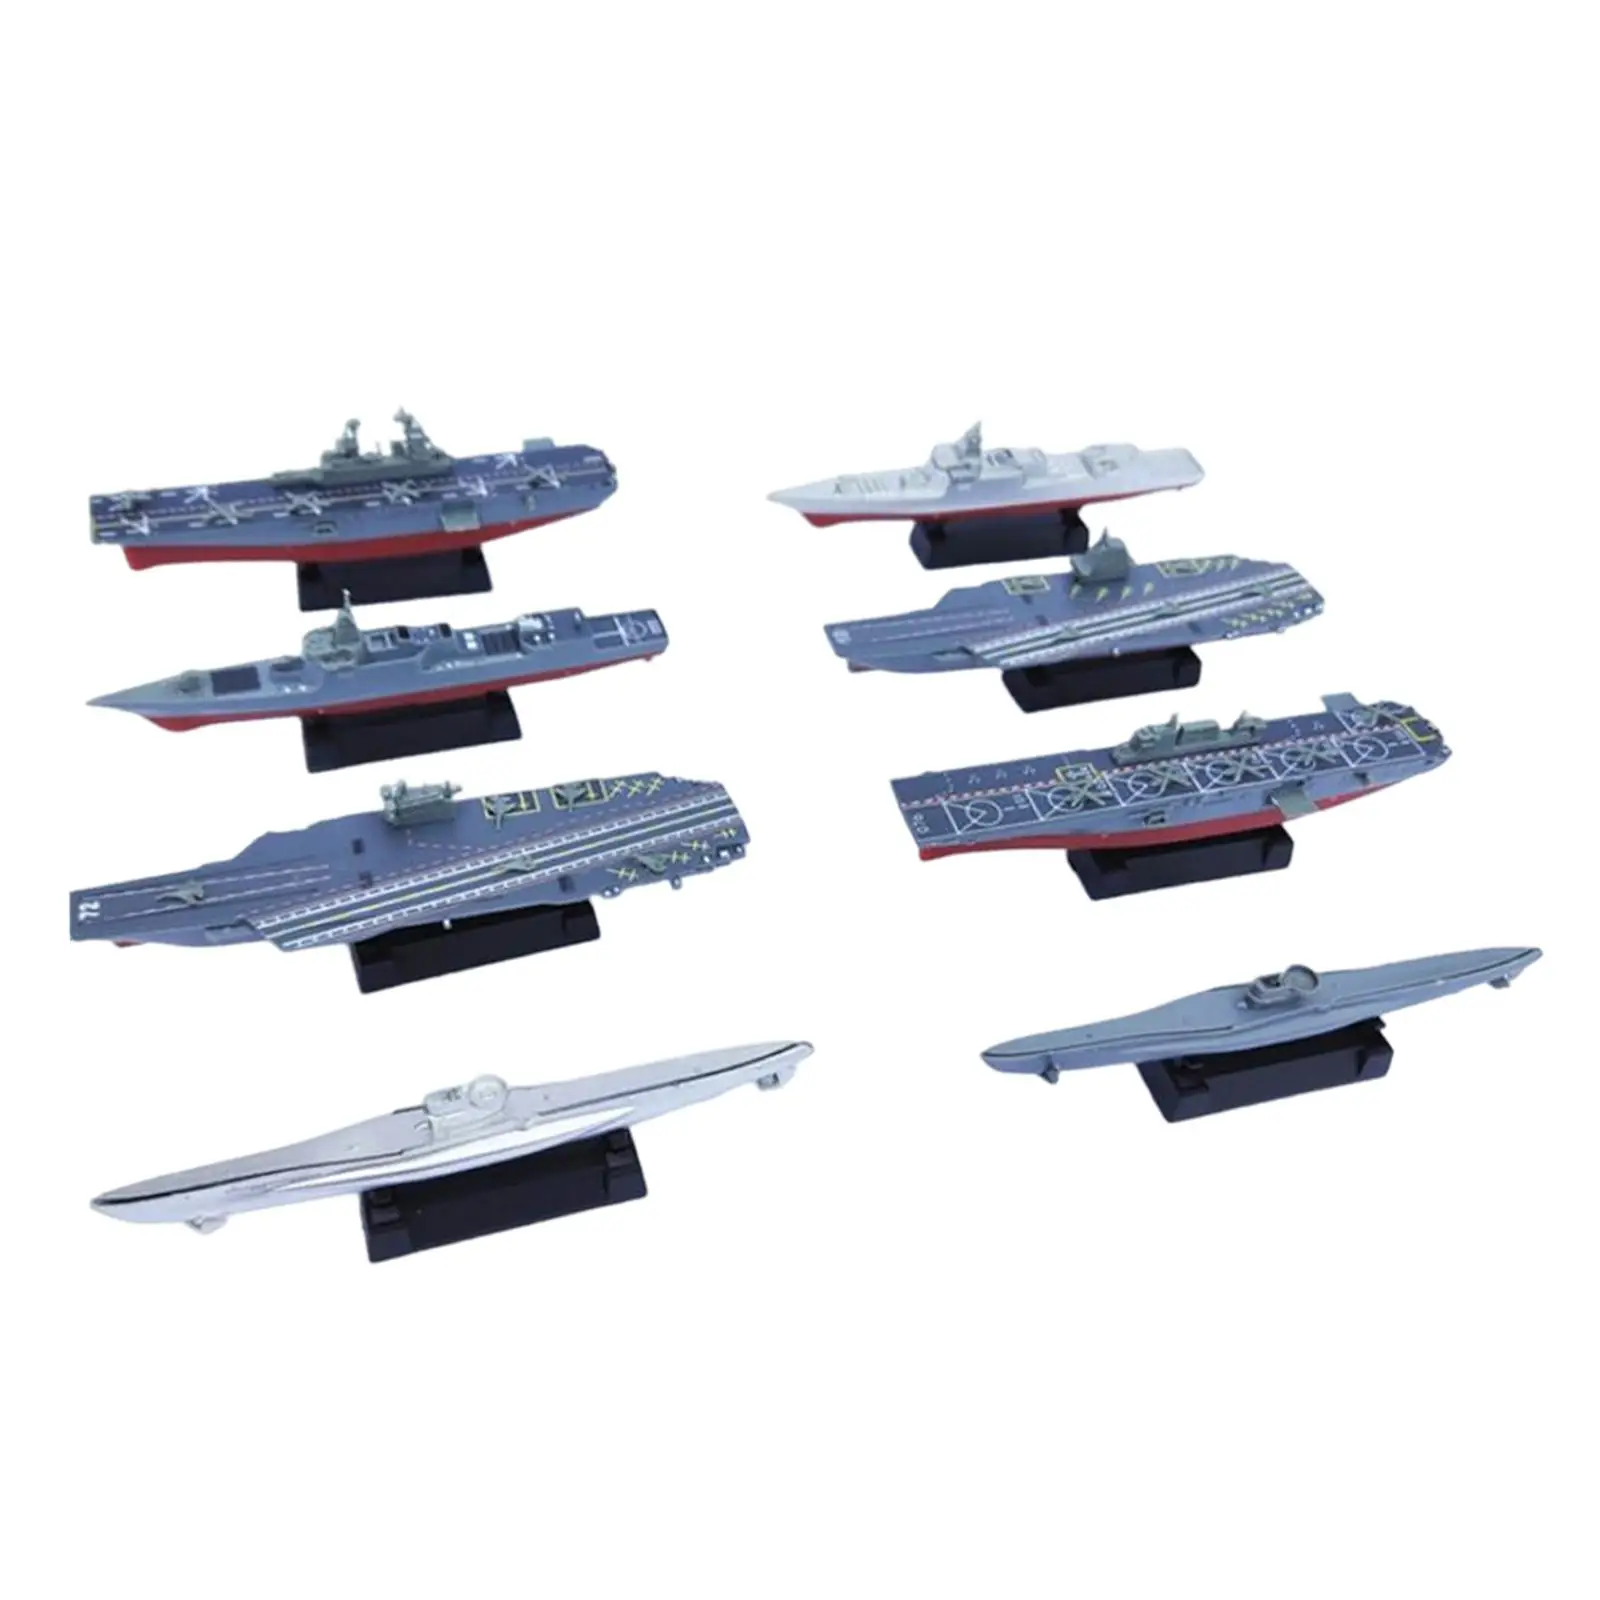 

8x 4D Assembled Ship Model Collection Playset Aircraft Carrier Model Warship Model Toy for Adults Children Girls Kids Gifts